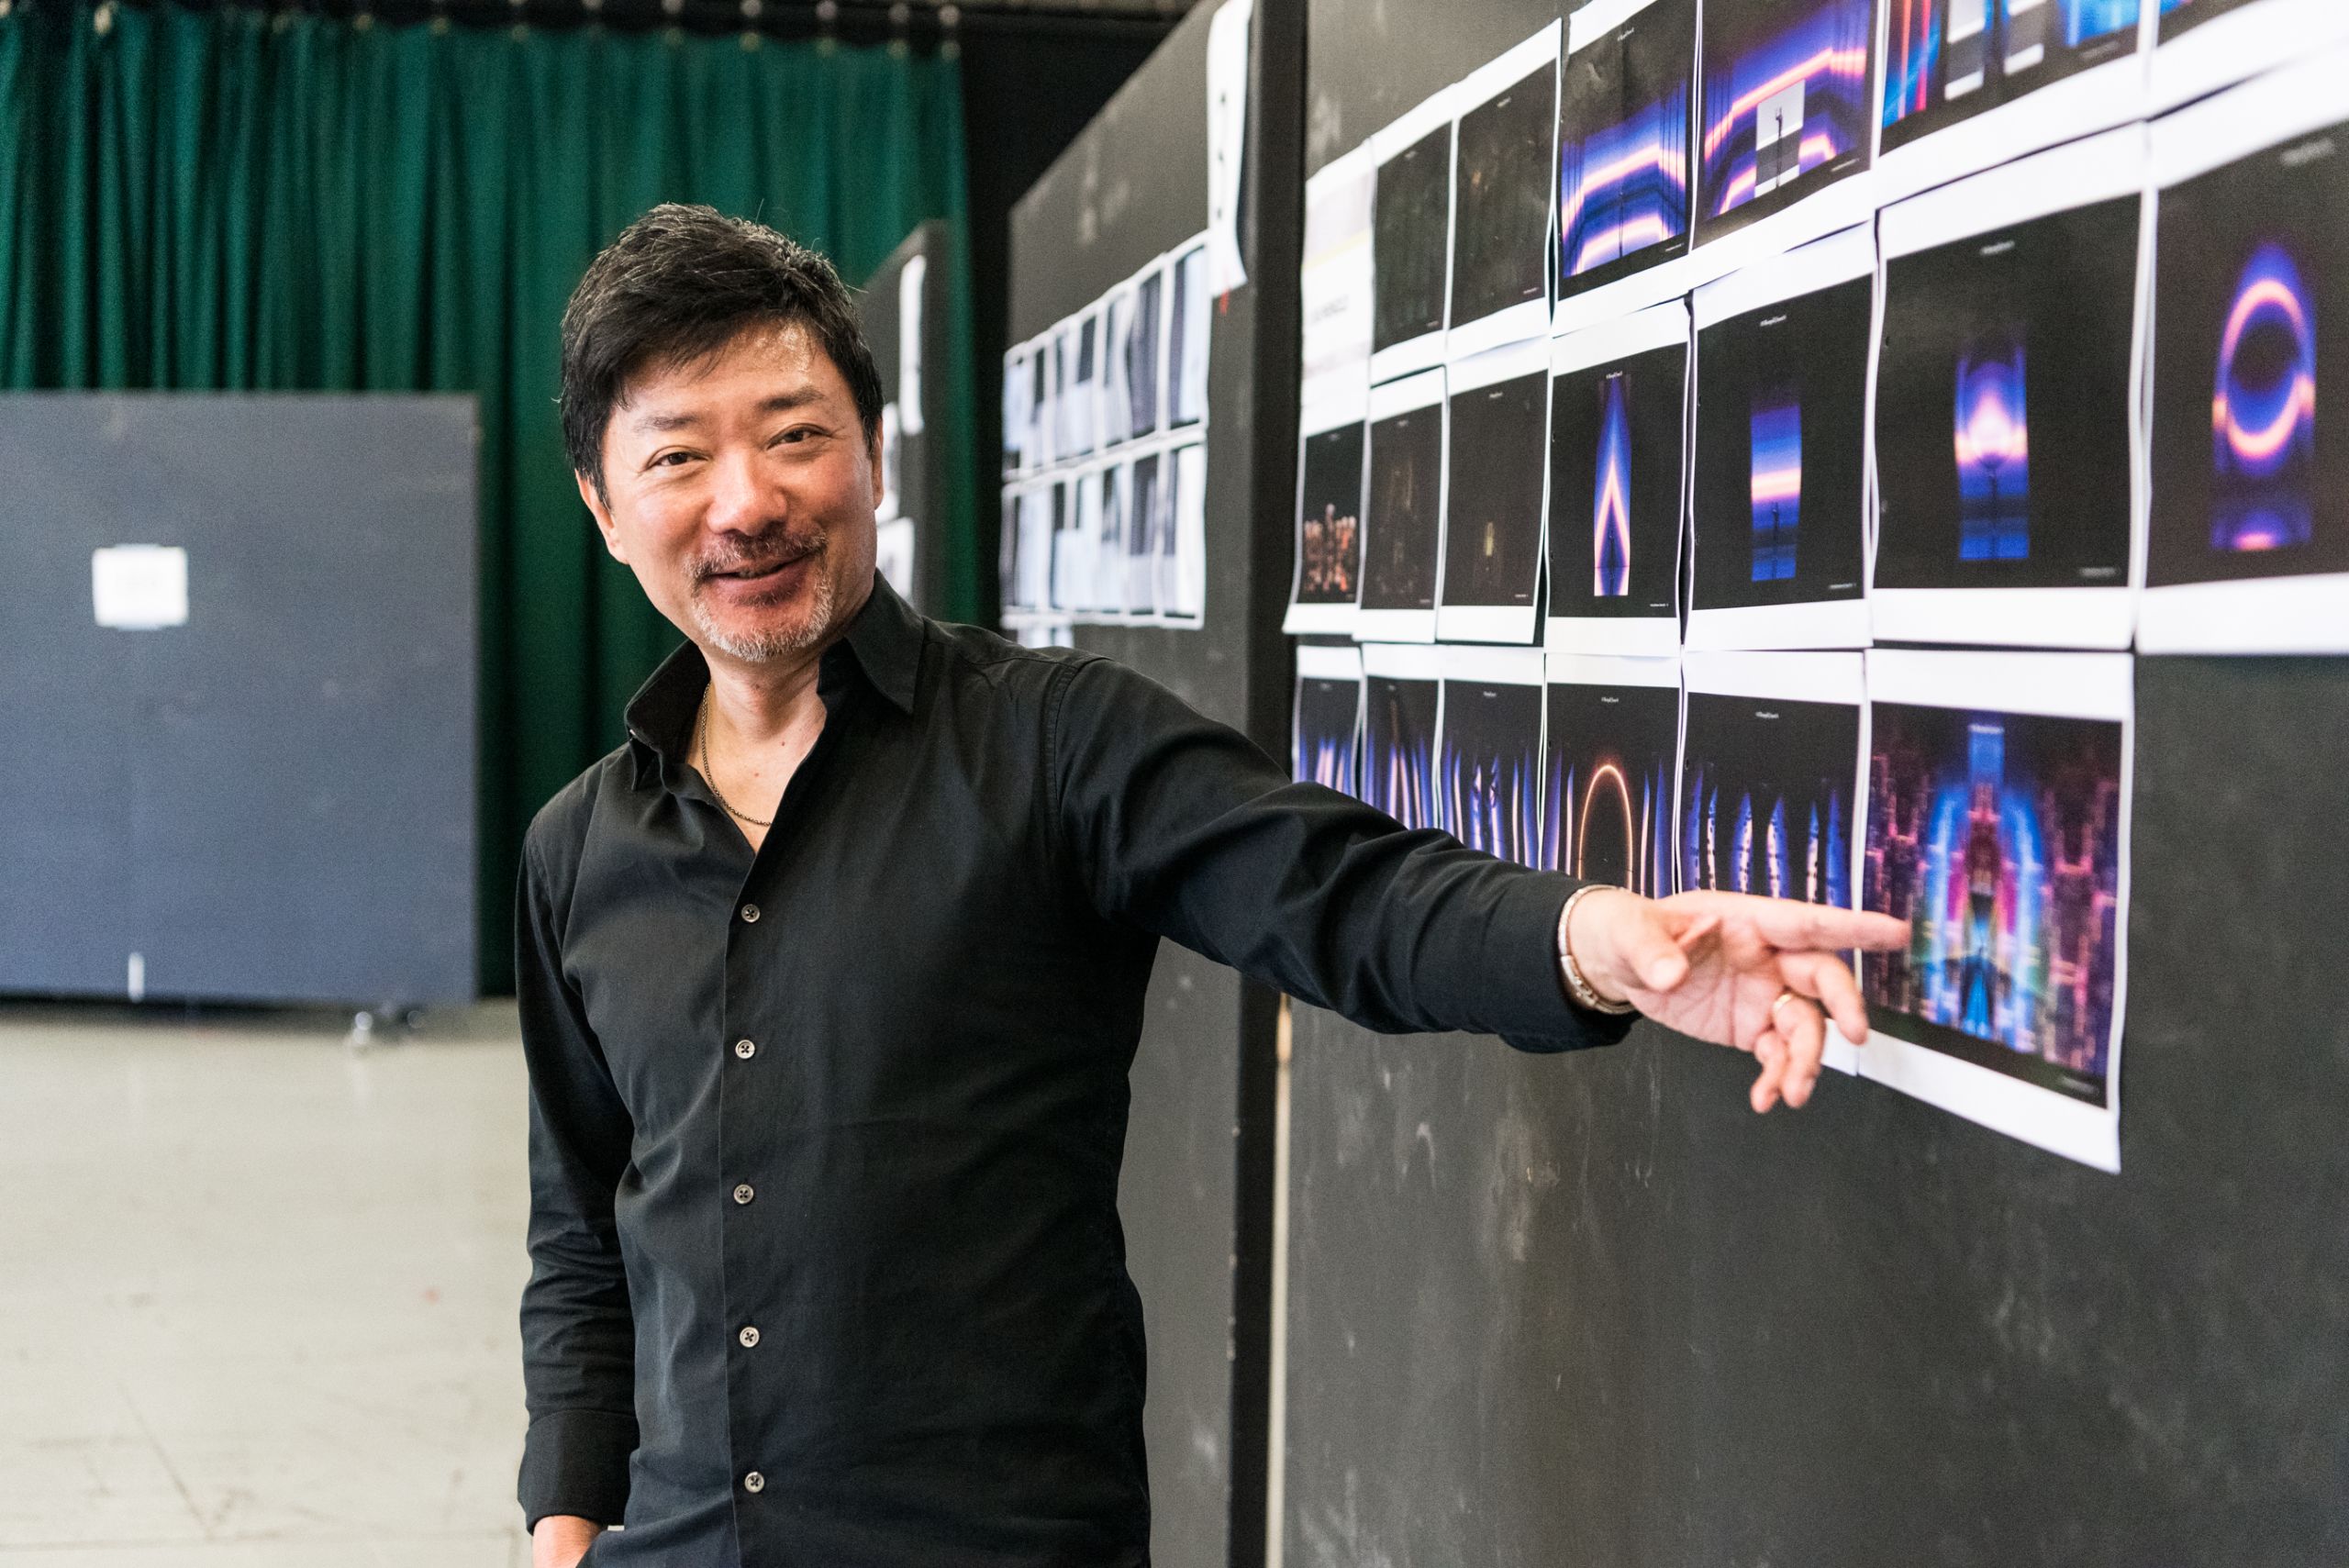 Director Chen Shi-Zheng stands in front of a board with images of futuristic set designs.